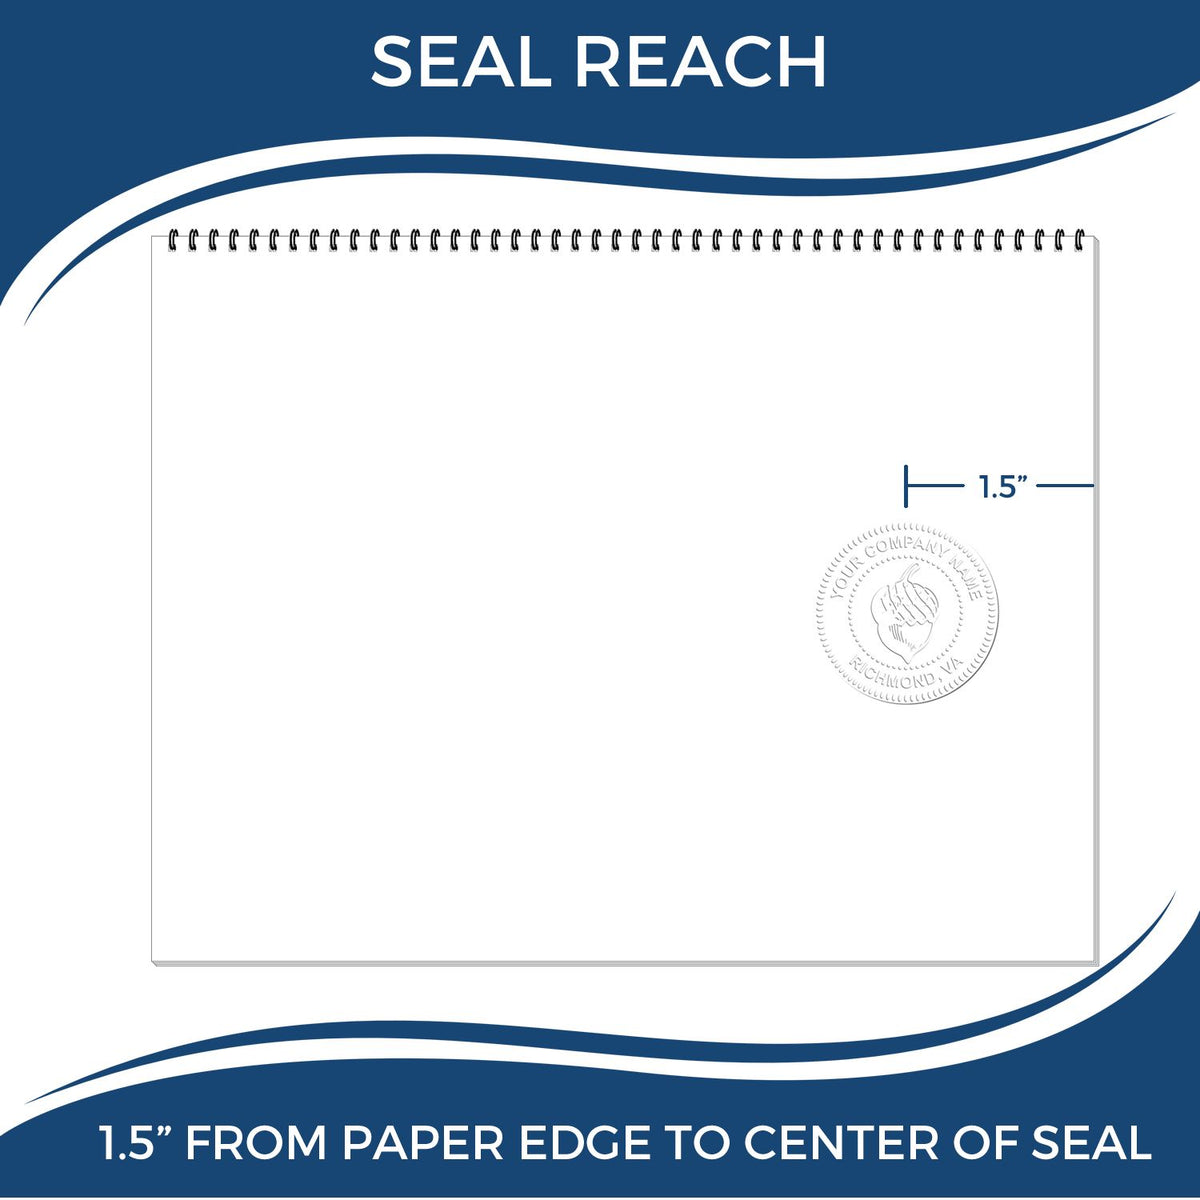 An infographic showing the seal reach which is represented by a ruler and a miniature seal image of the Handheld Utah Architect Seal Embosser